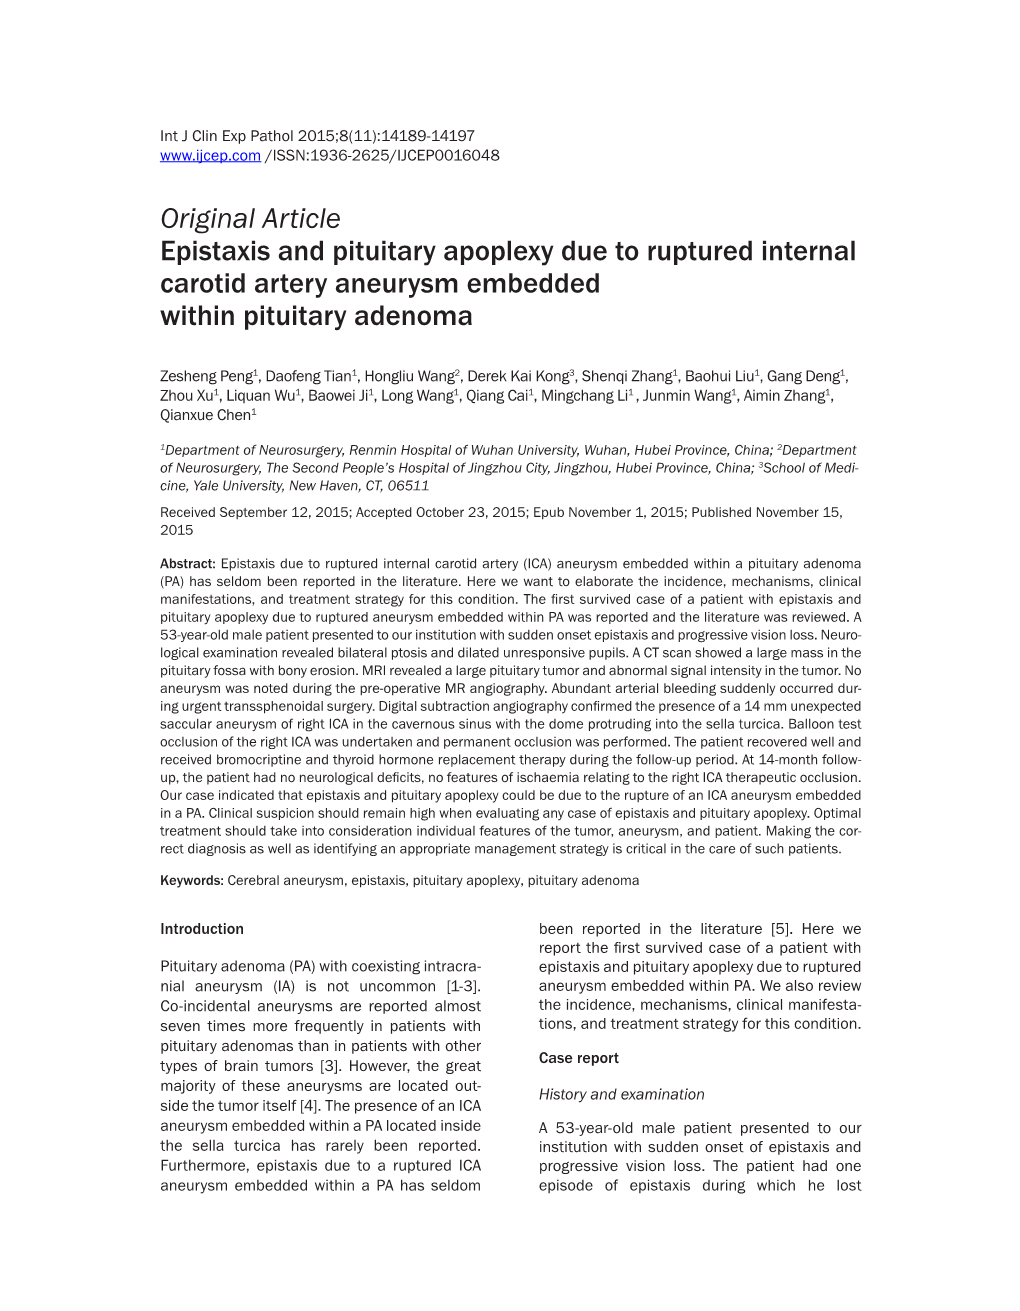 Original Article Epistaxis and Pituitary Apoplexy Due to Ruptured Internal Carotid Artery Aneurysm Embedded Within Pituitary Adenoma